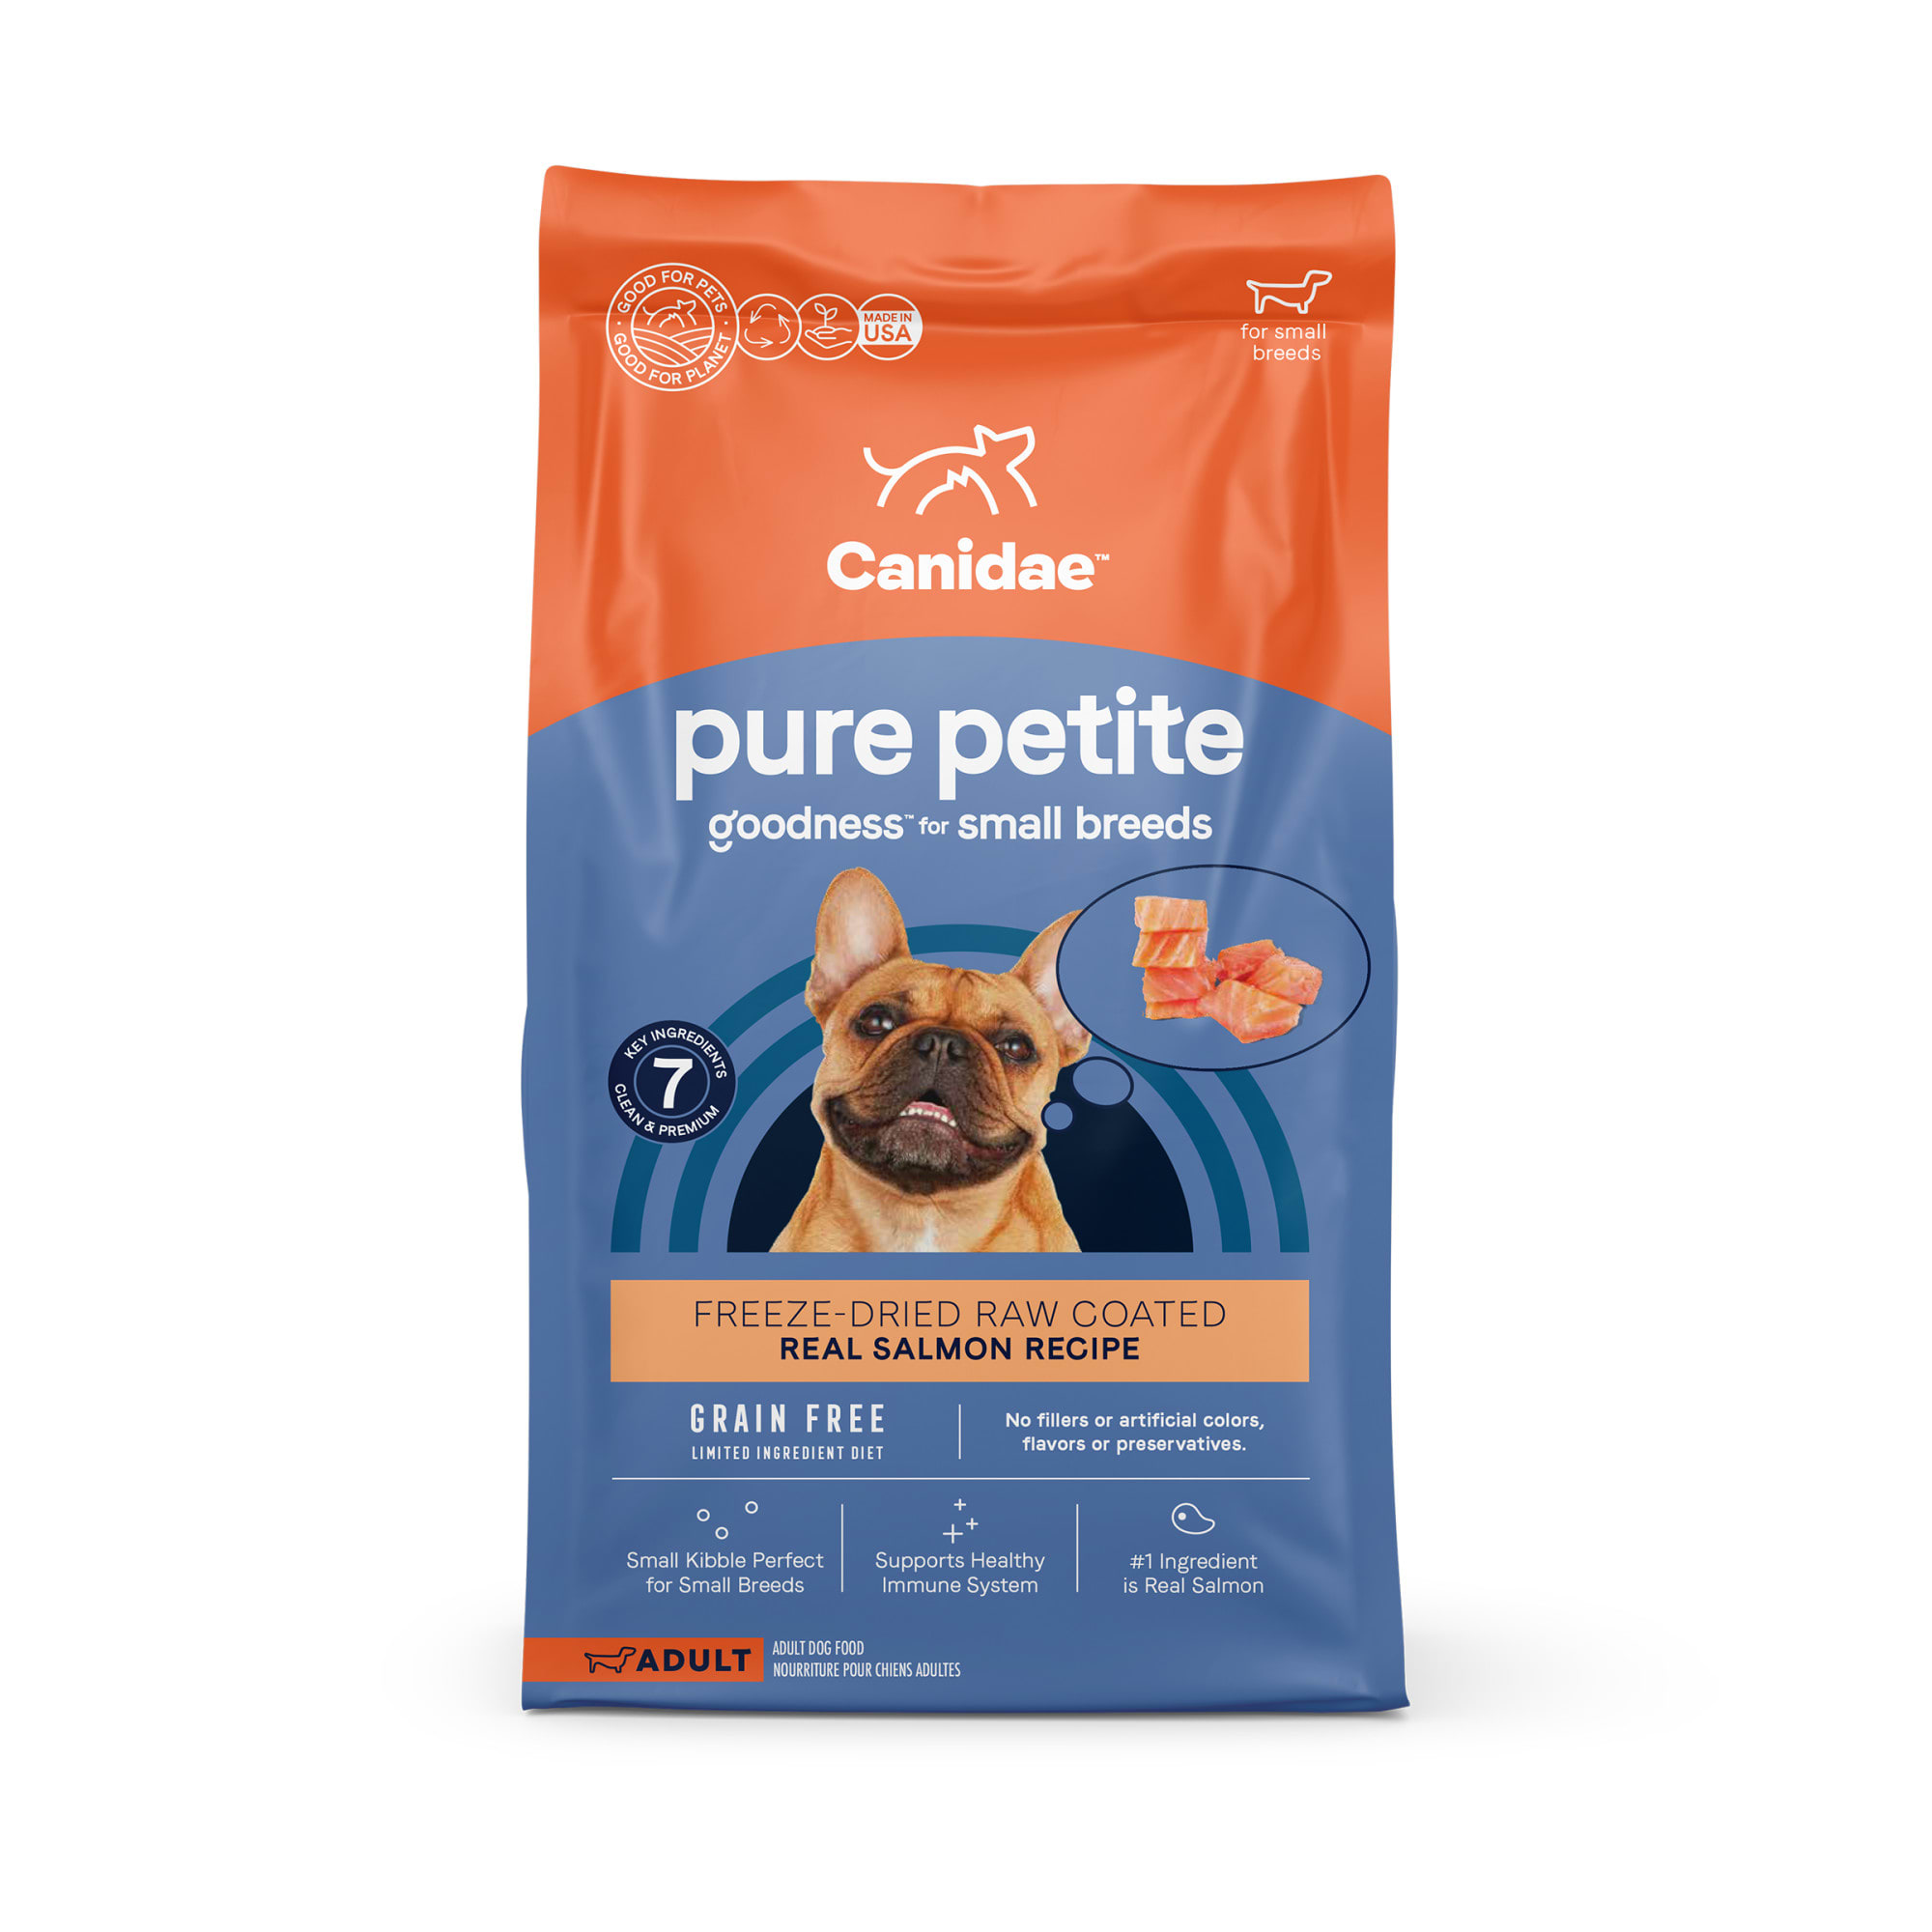 Photos - Dog Food Canidae Pure Grain Free Petite Small Breed Limited Ingredient Diet 